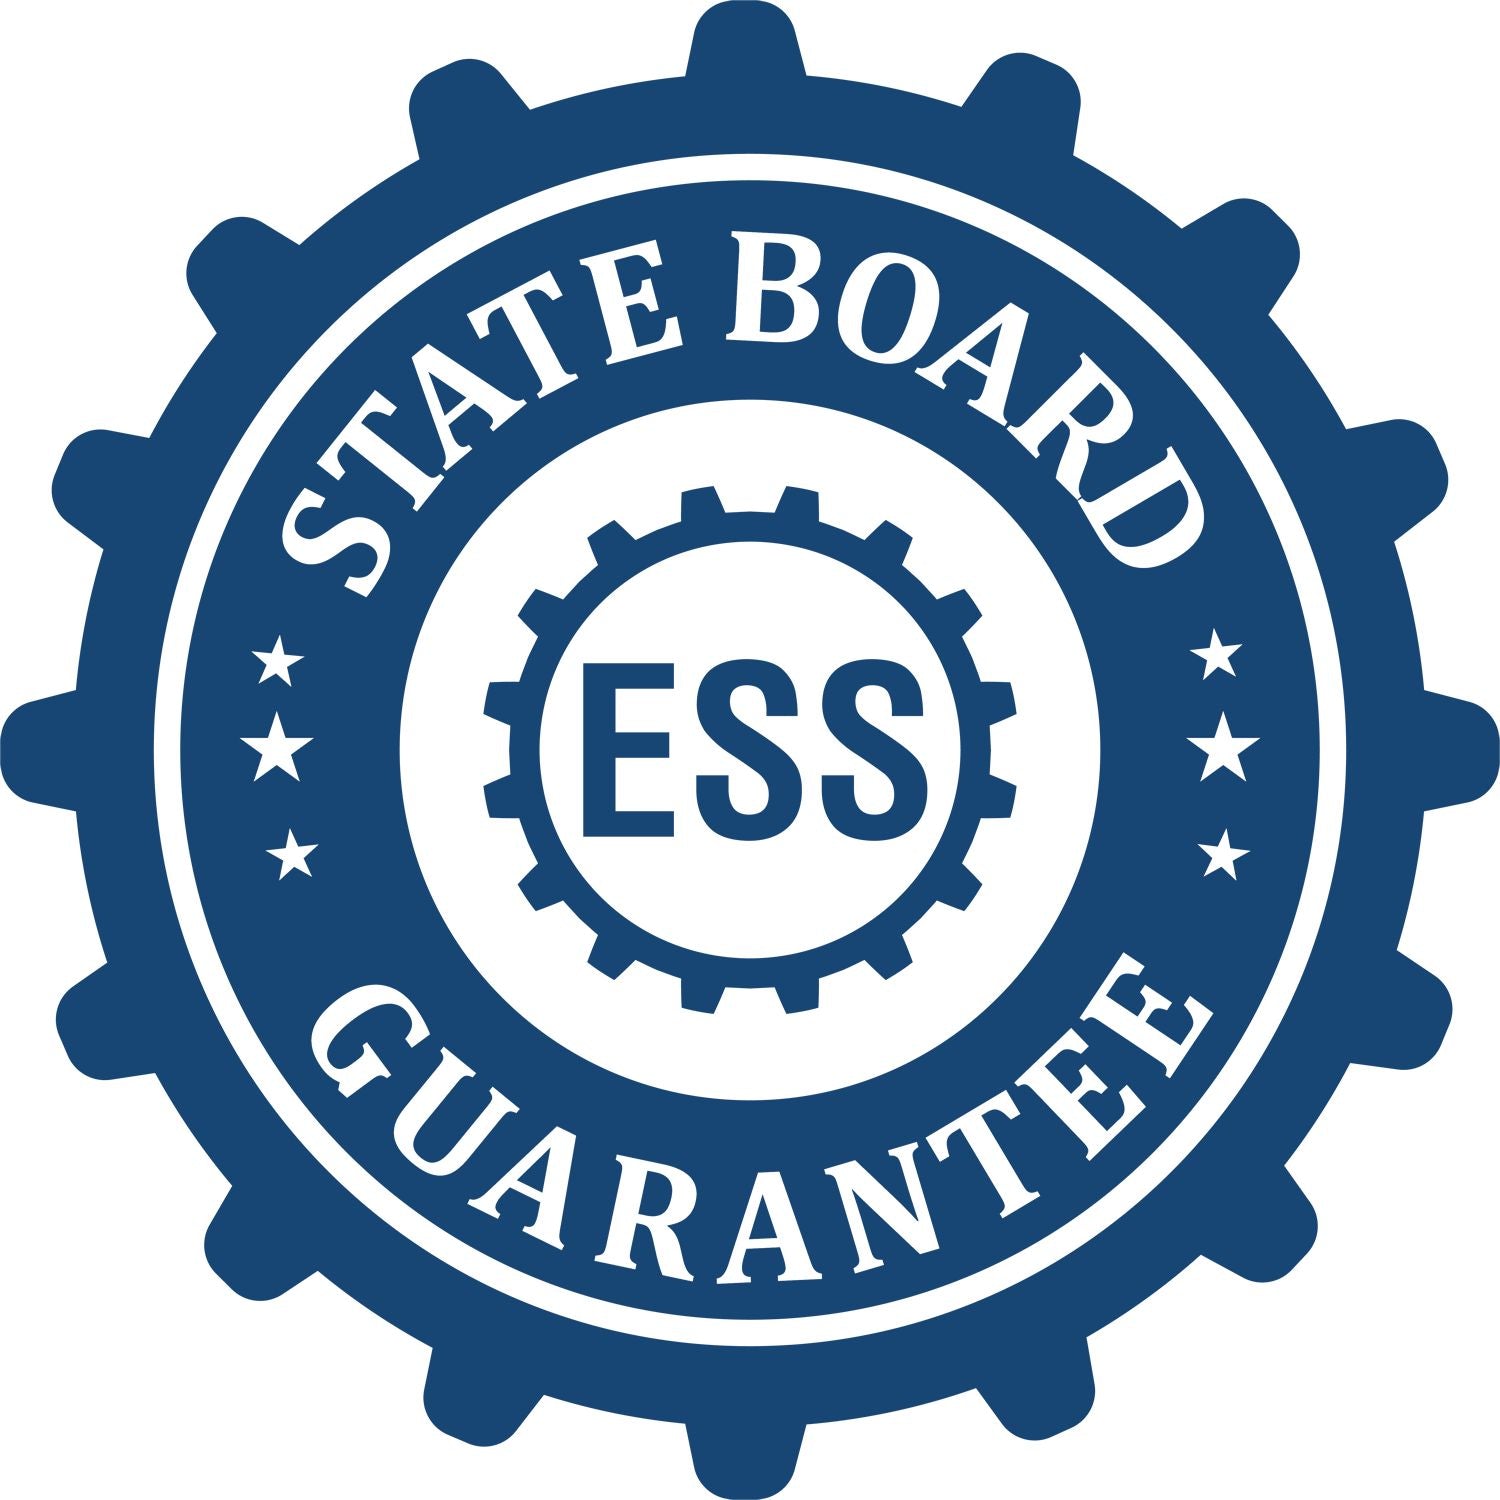 An emblem in a gear shape illustrating a state board guarantee for the Digital Massachusetts PE Stamp and Electronic Seal for Massachusetts Engineer product.